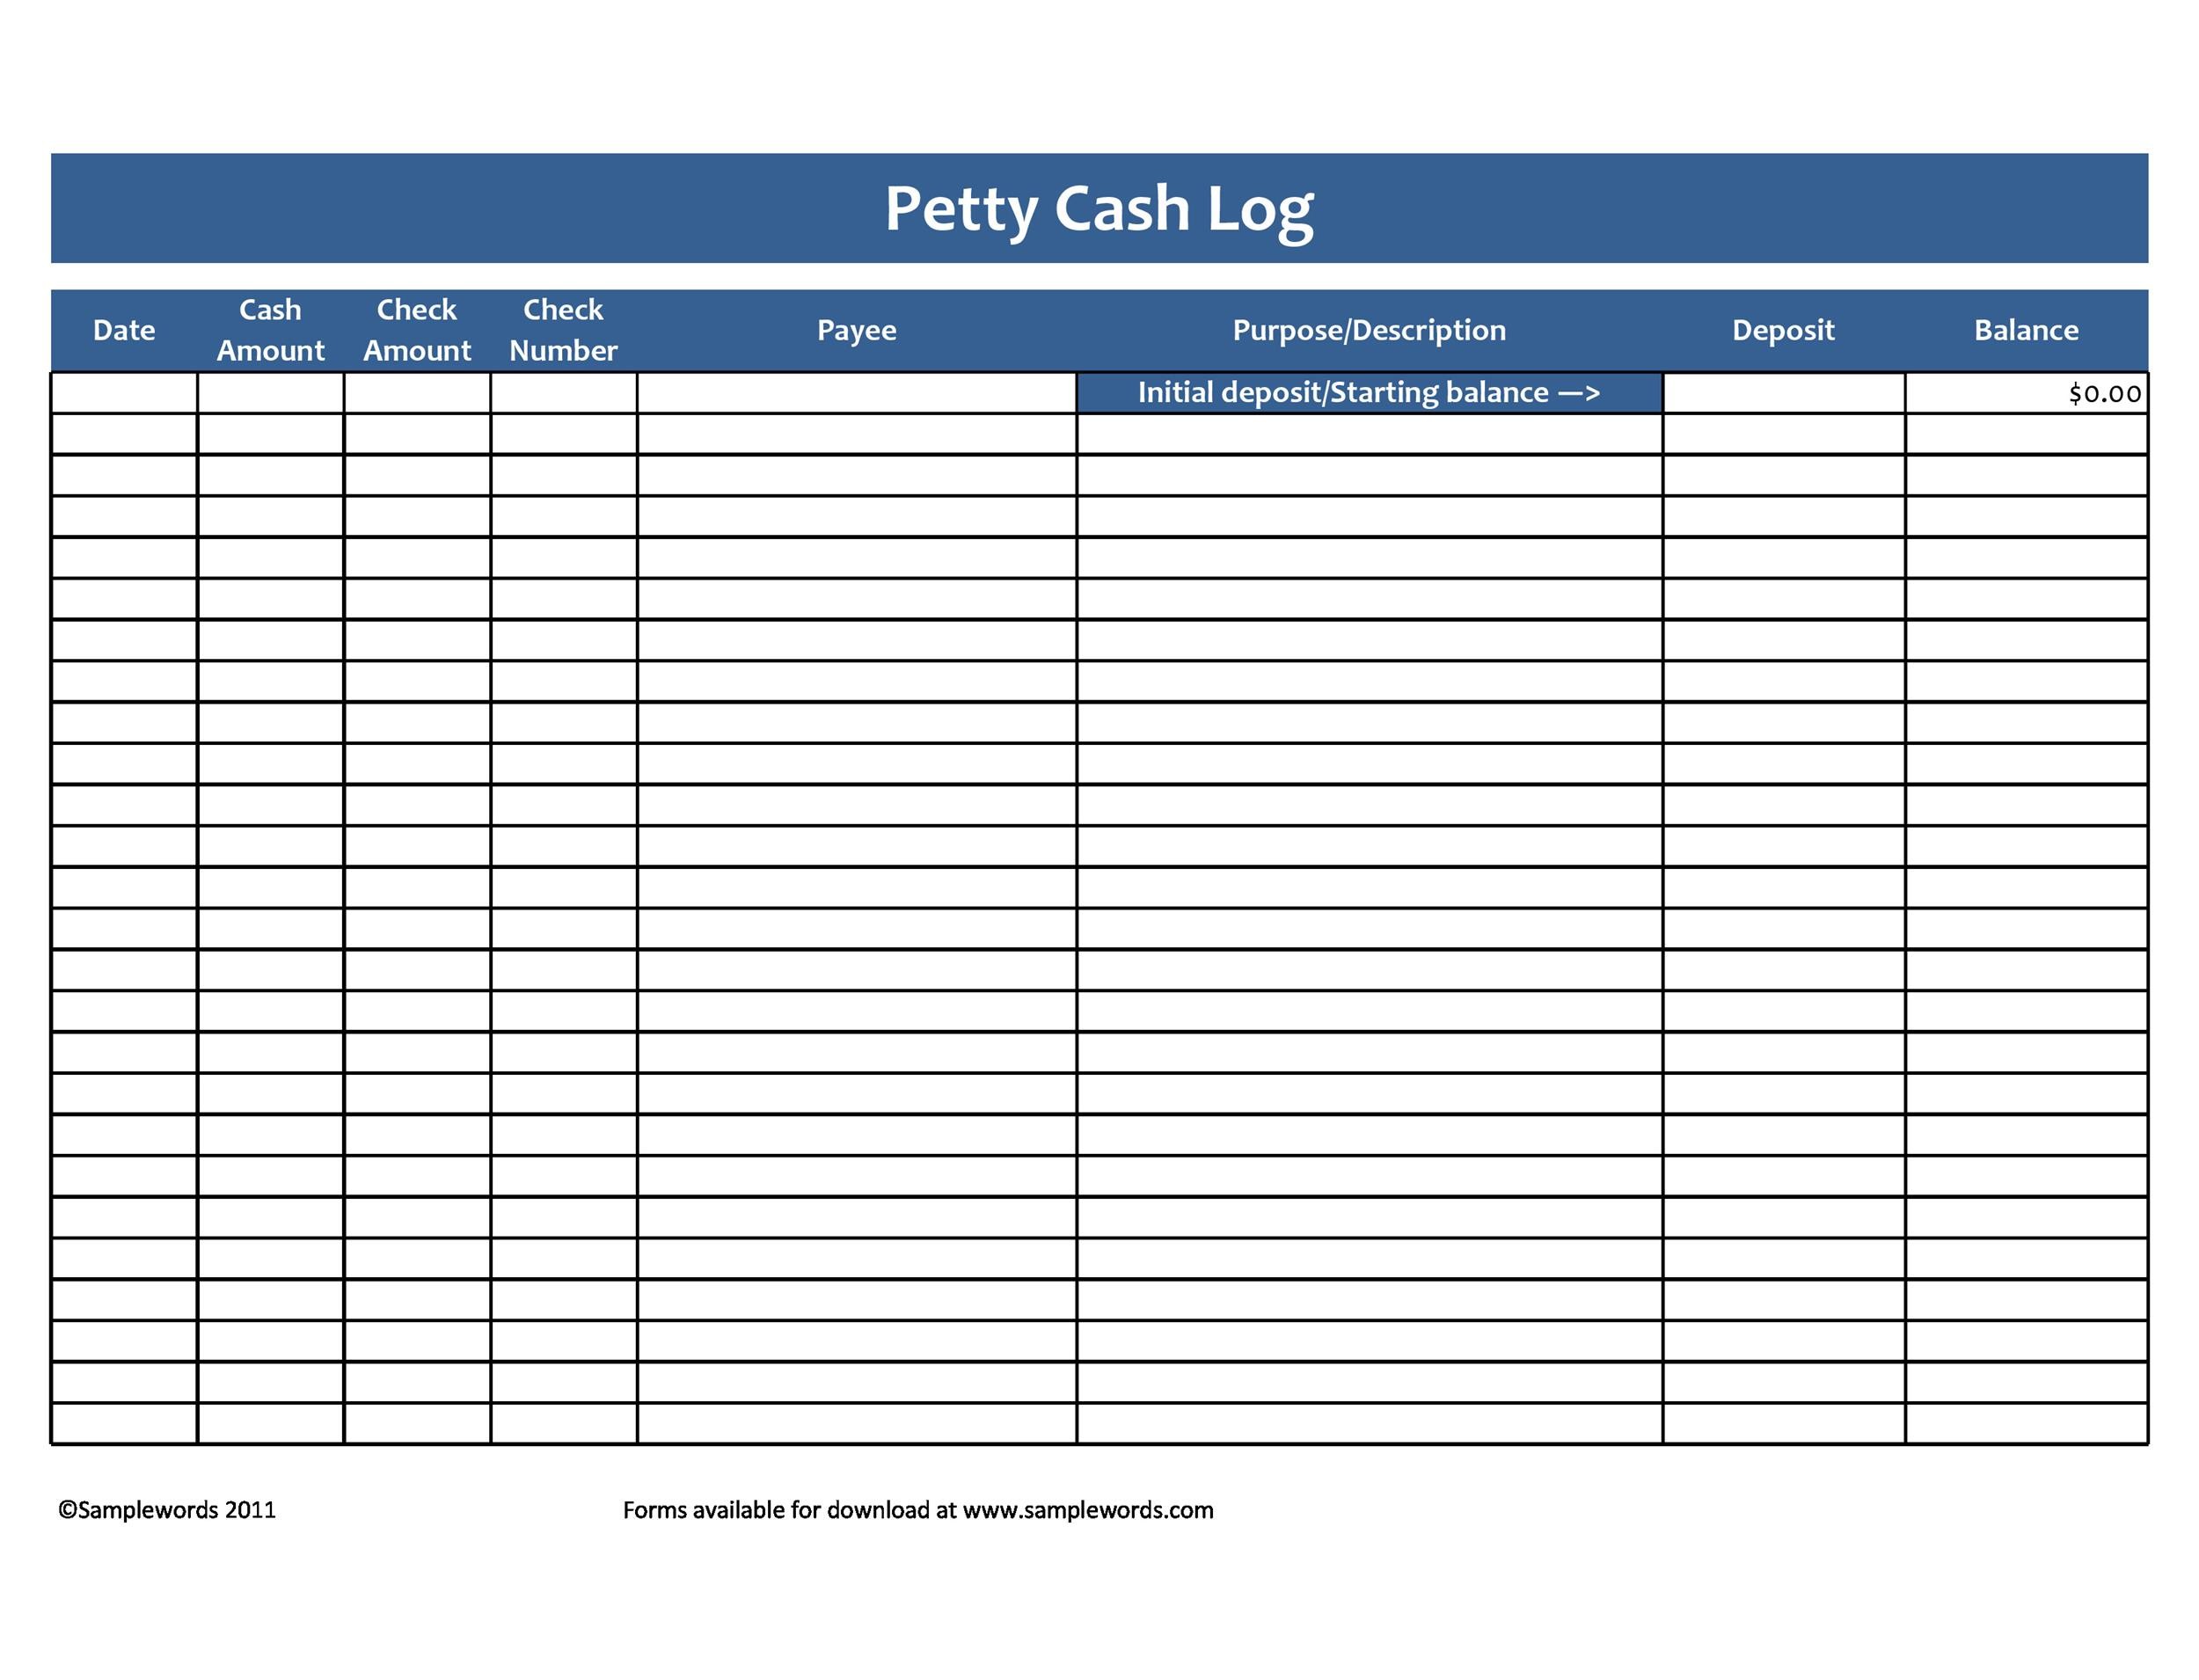 download-petty-cash-paid-out-form-for-free-formtemplate-riset